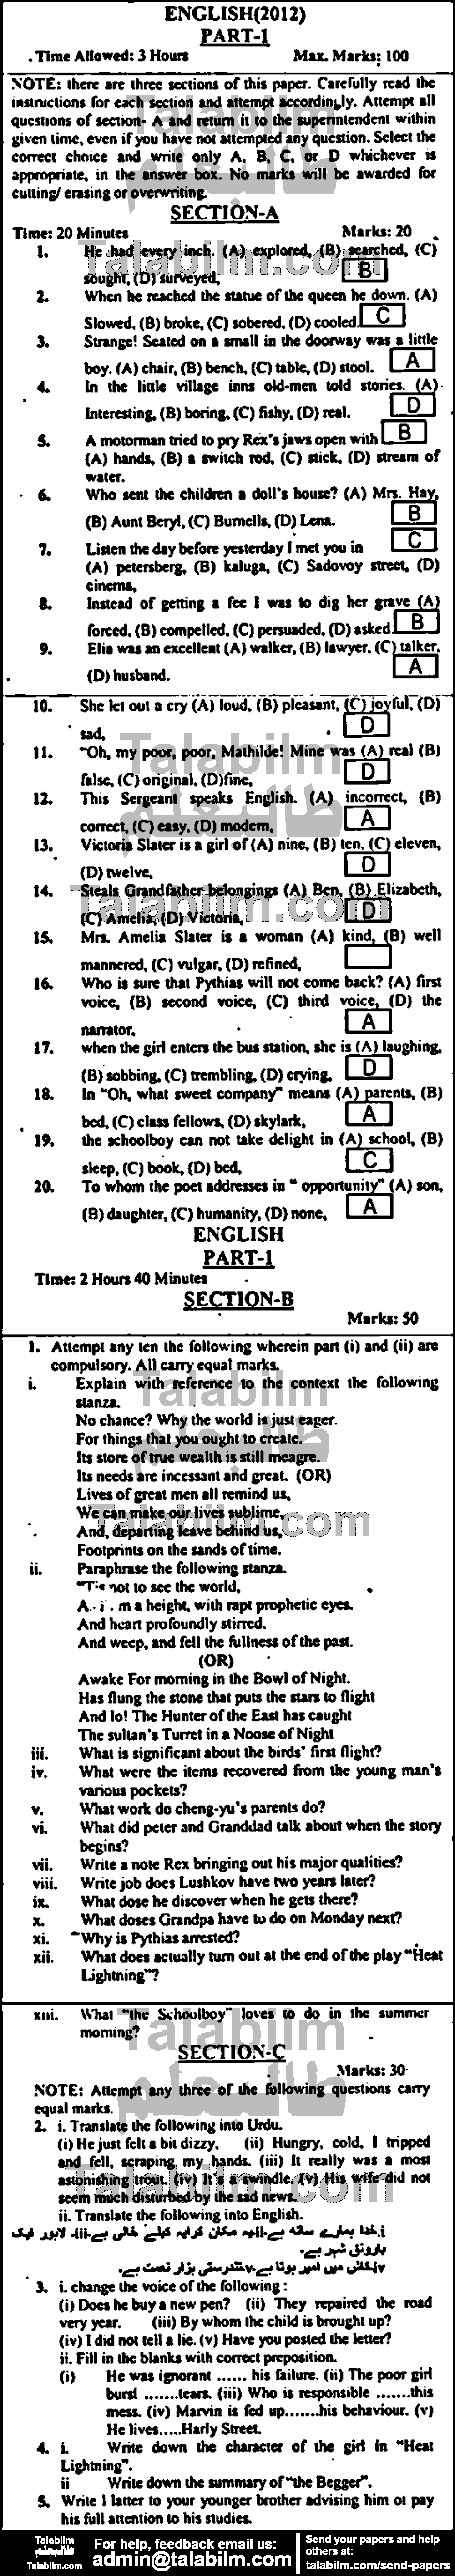 English 0 past paper for Group-I 2012